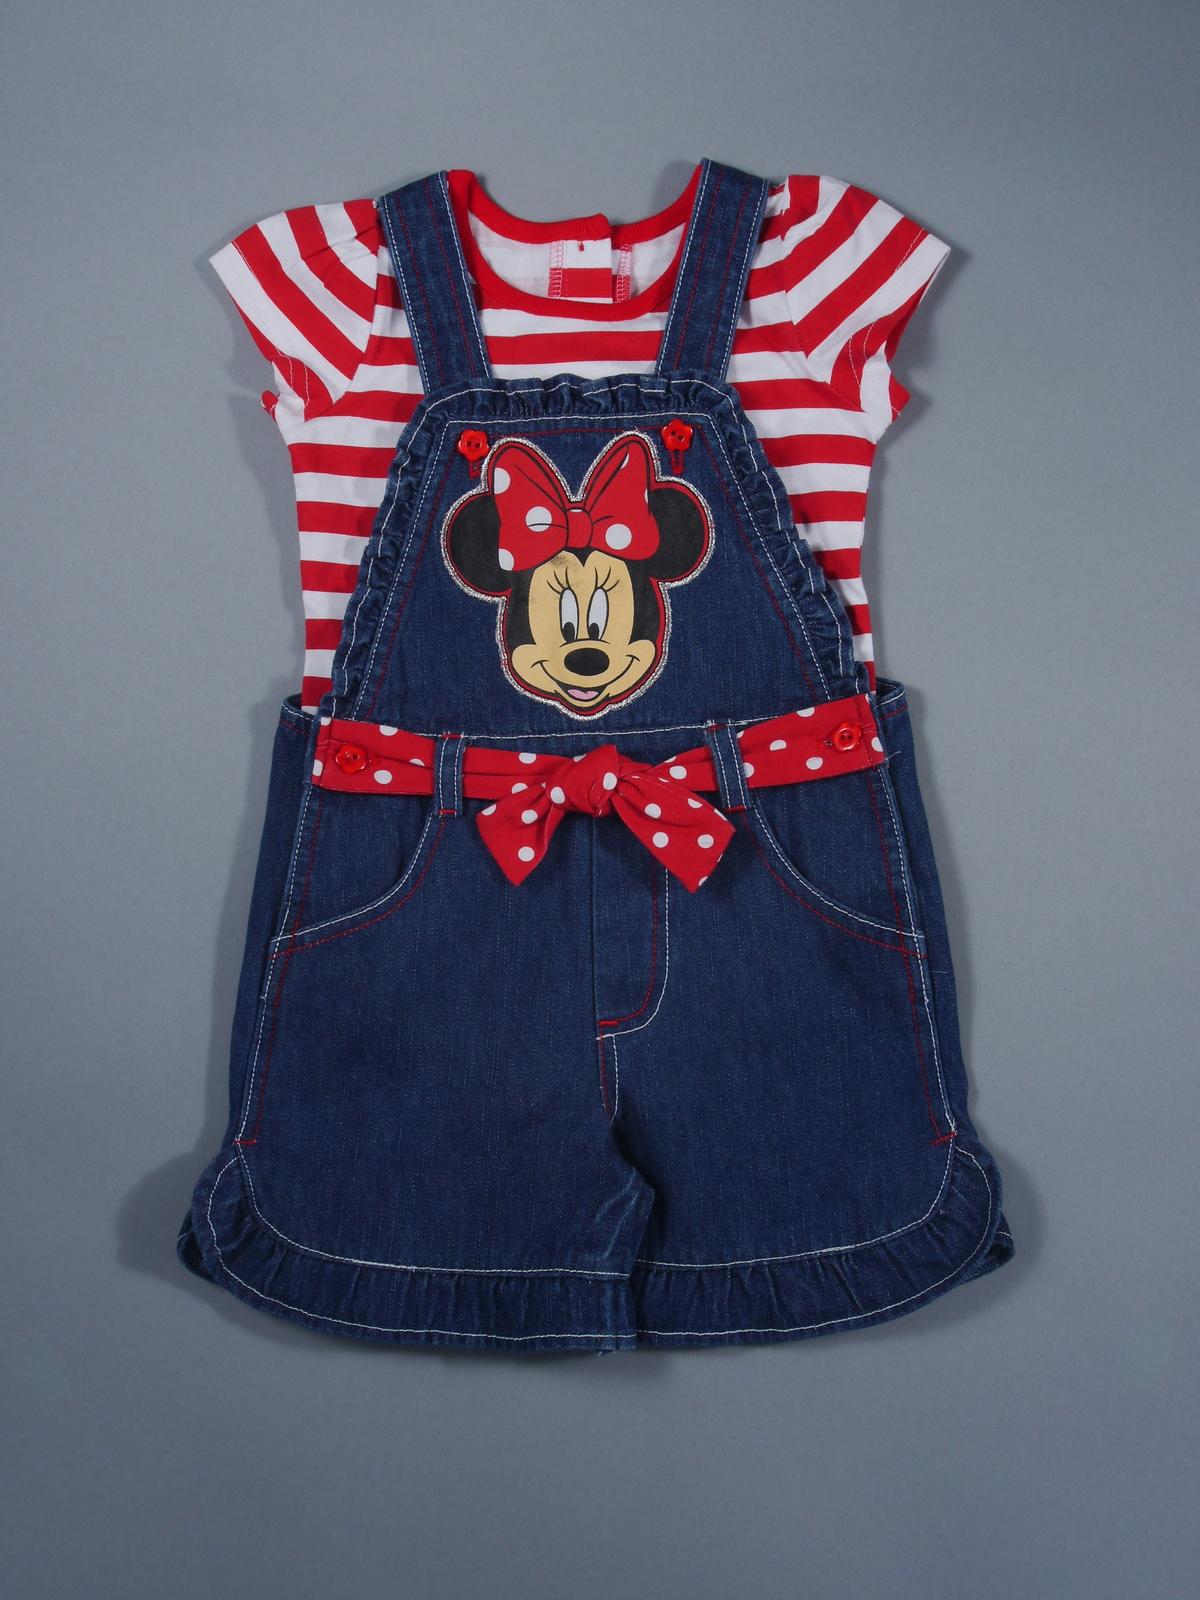 Disney Minnie Mouse Toddler Girl's Top & Denim Overalls - Striped